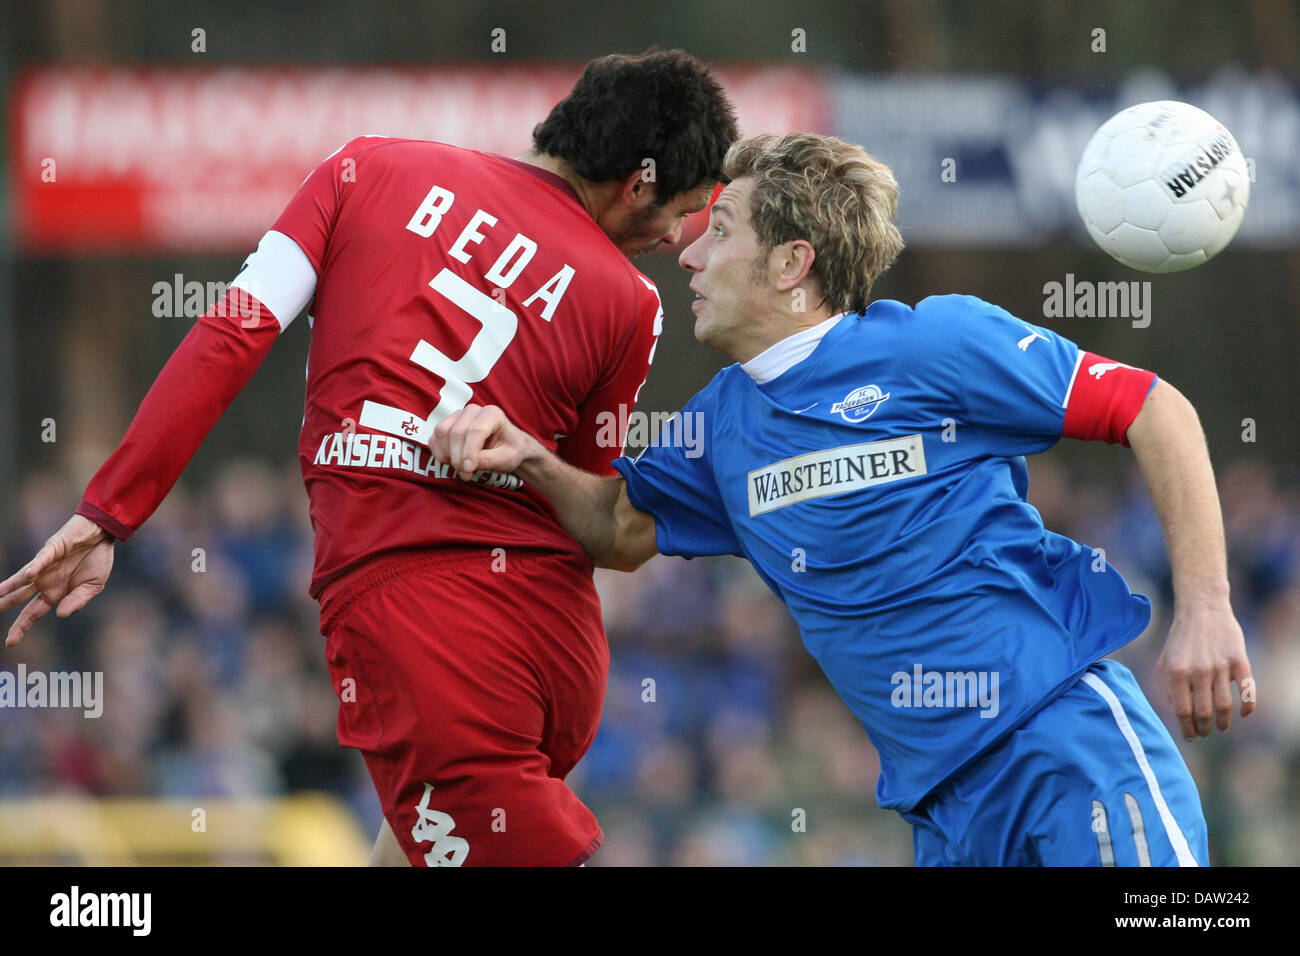 Rene Mueller (R) of Paderborn and Mathieu Beda (L) fo Kaiserslautern play a heading duel during the Bundesliga 2nd division match SC Paderborn vs 1.FC Kaiserslautern at the Hermann LOens stadium of Paderborn, Germany, 4 February 2007. Photo: Friso Gentsch Stock Photo